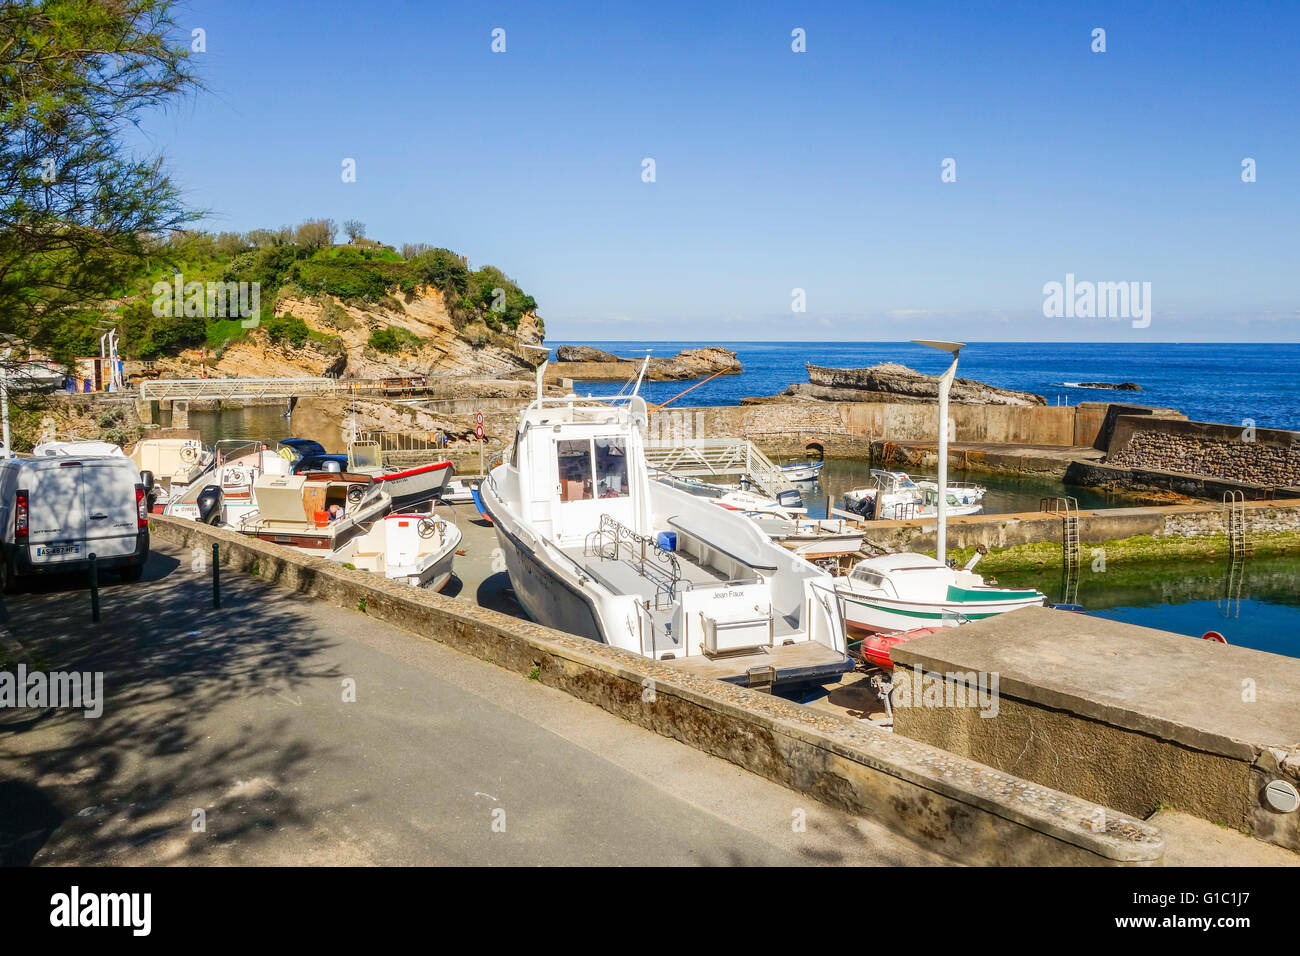 Small boats at Port des Pêcheurs, old fishermen port, Biarritz. Aquitaine, basque country, France. Stock Photo